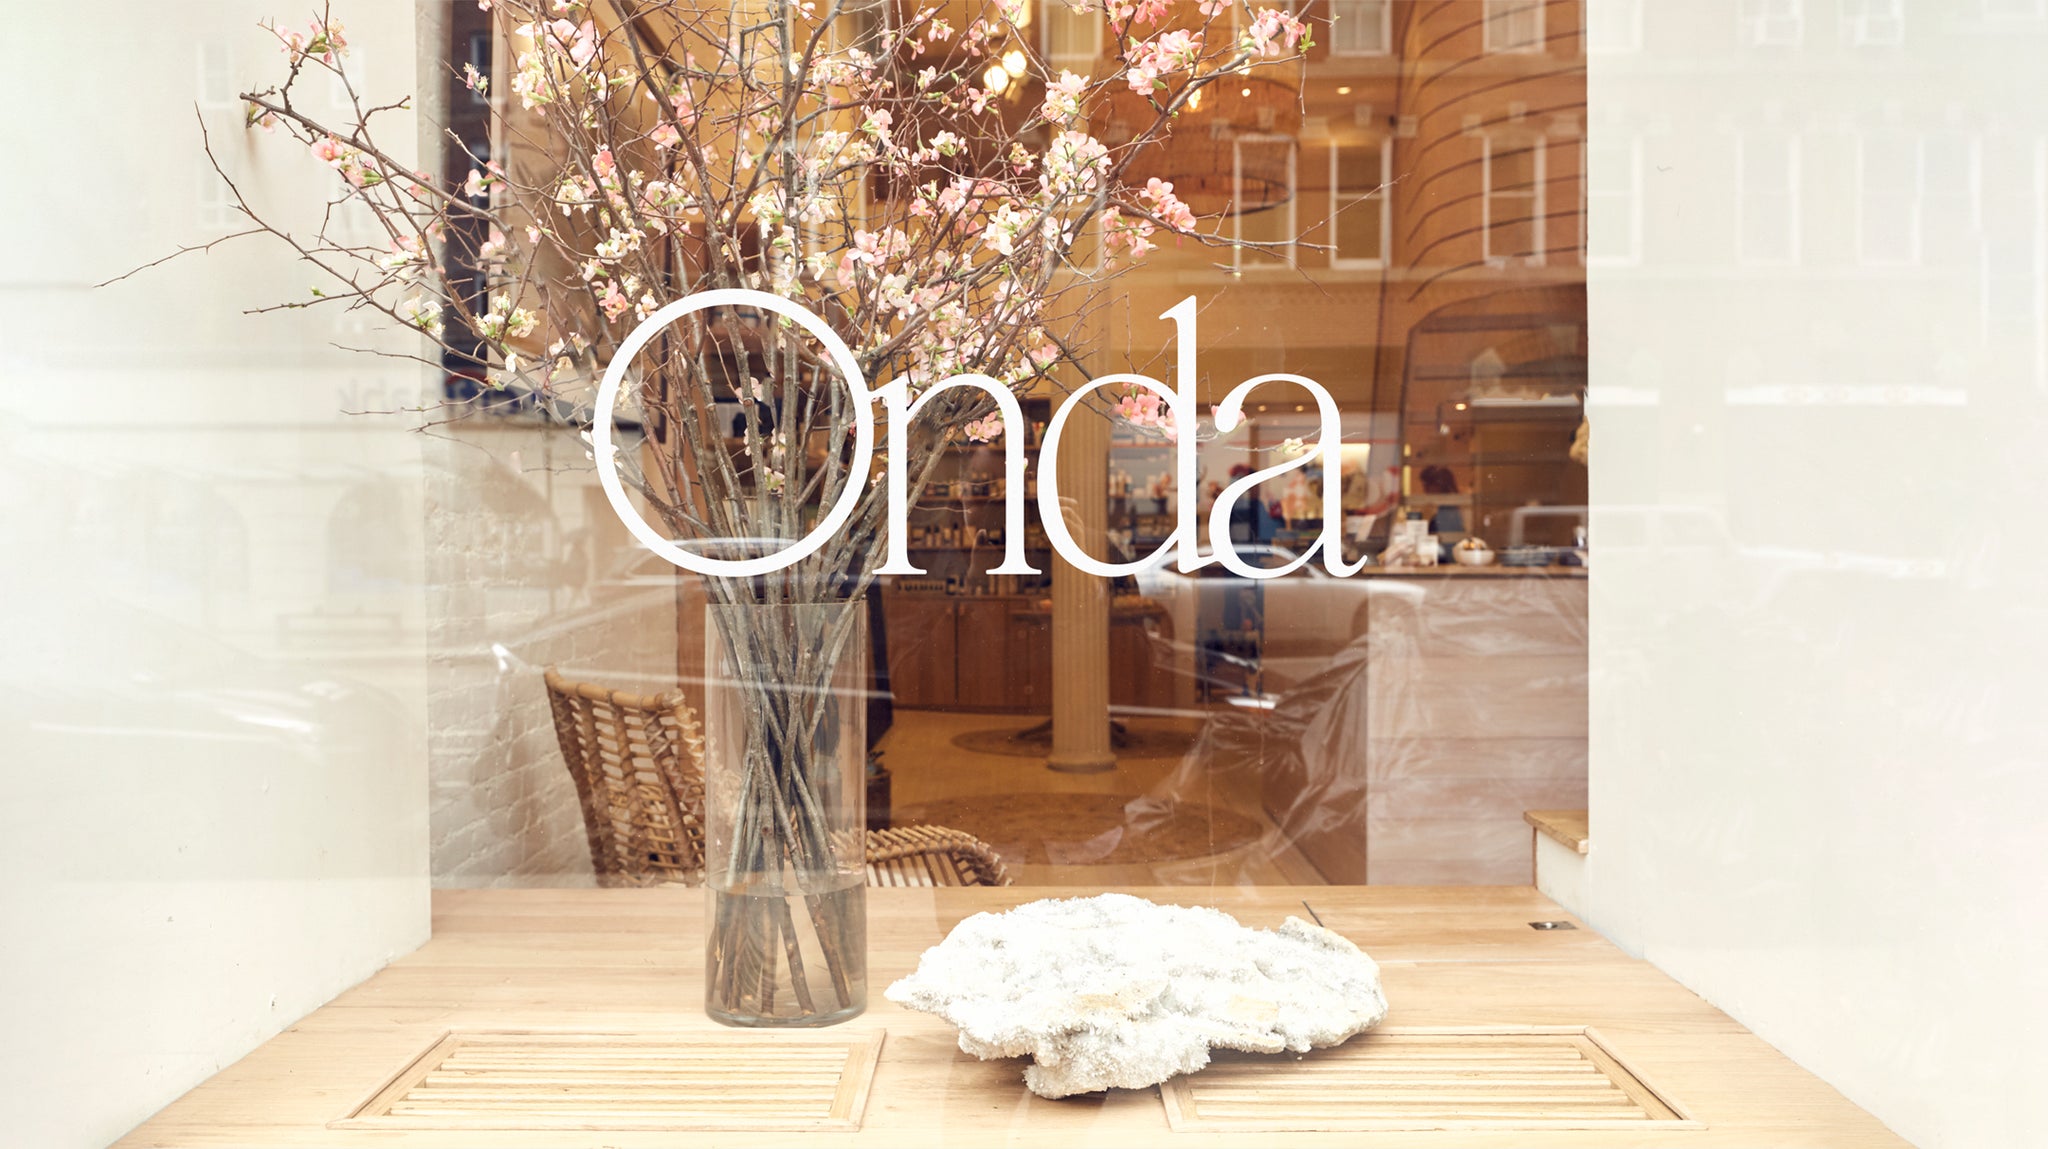 A Post Thanksgiving “Thank You” from Onda